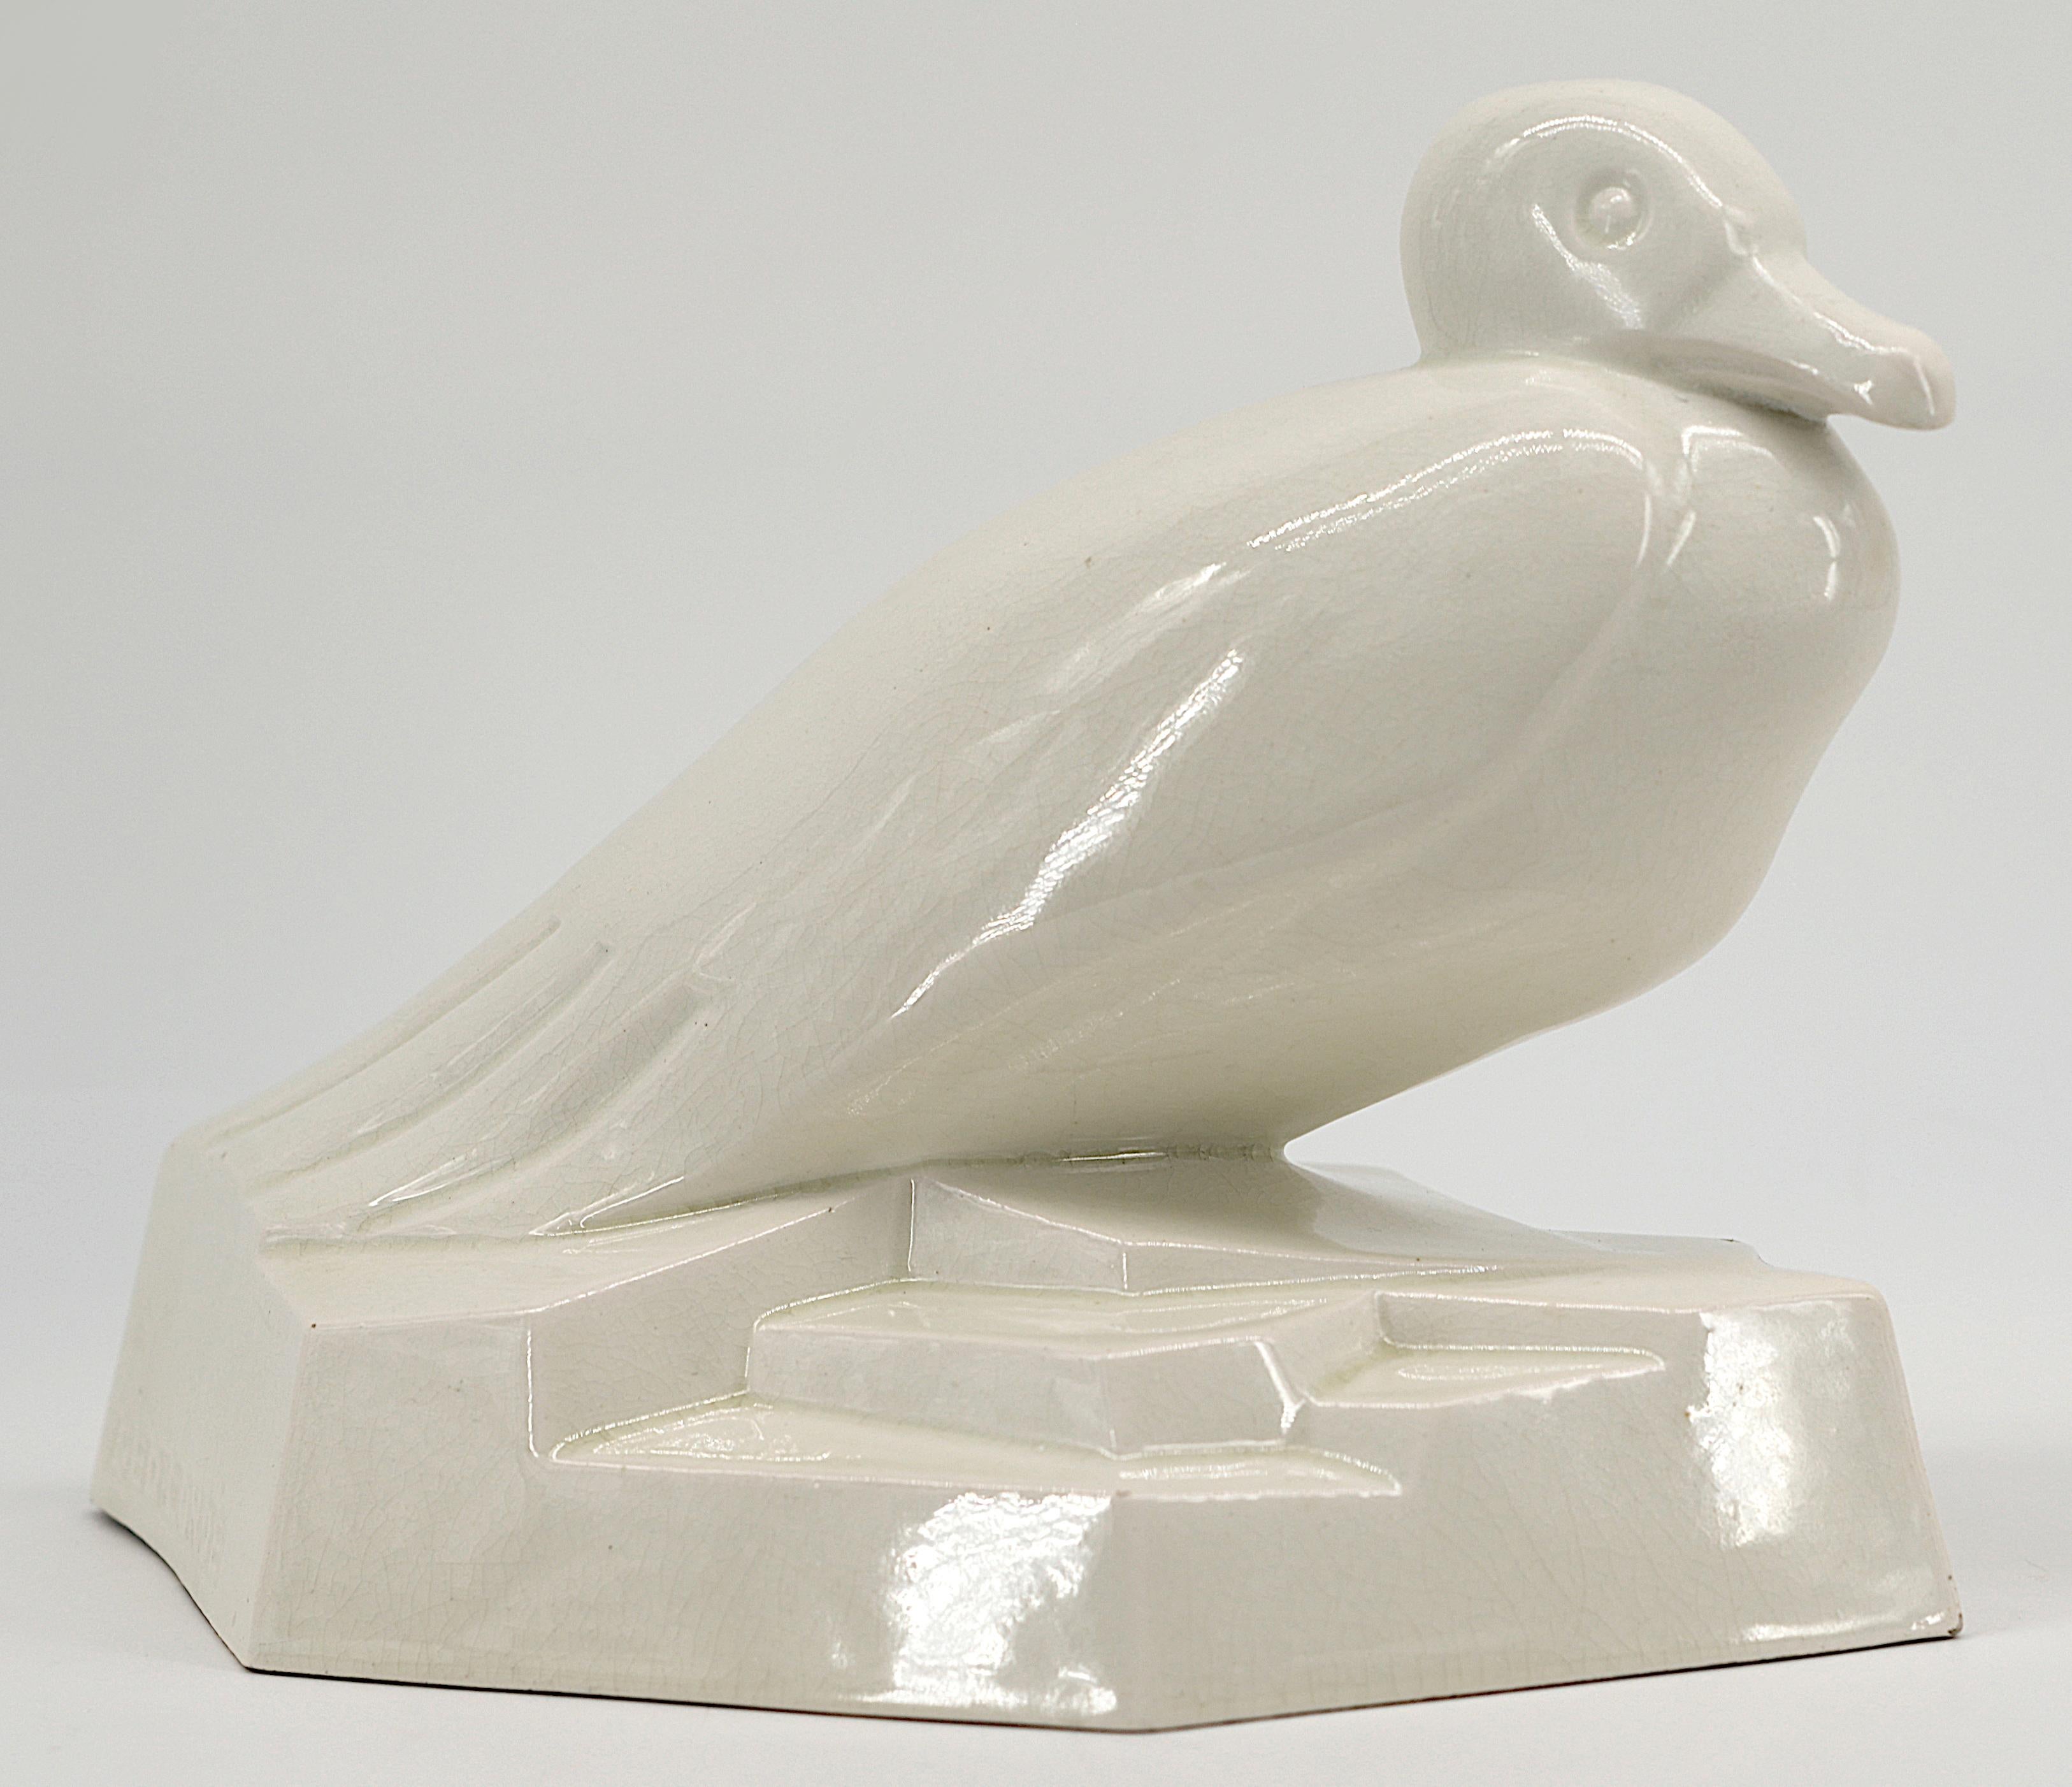 French Art Deco gull crackle glaze ceramic sculpture by GEO CONDE at Saint-Clement, France, 1920s. Width: 10